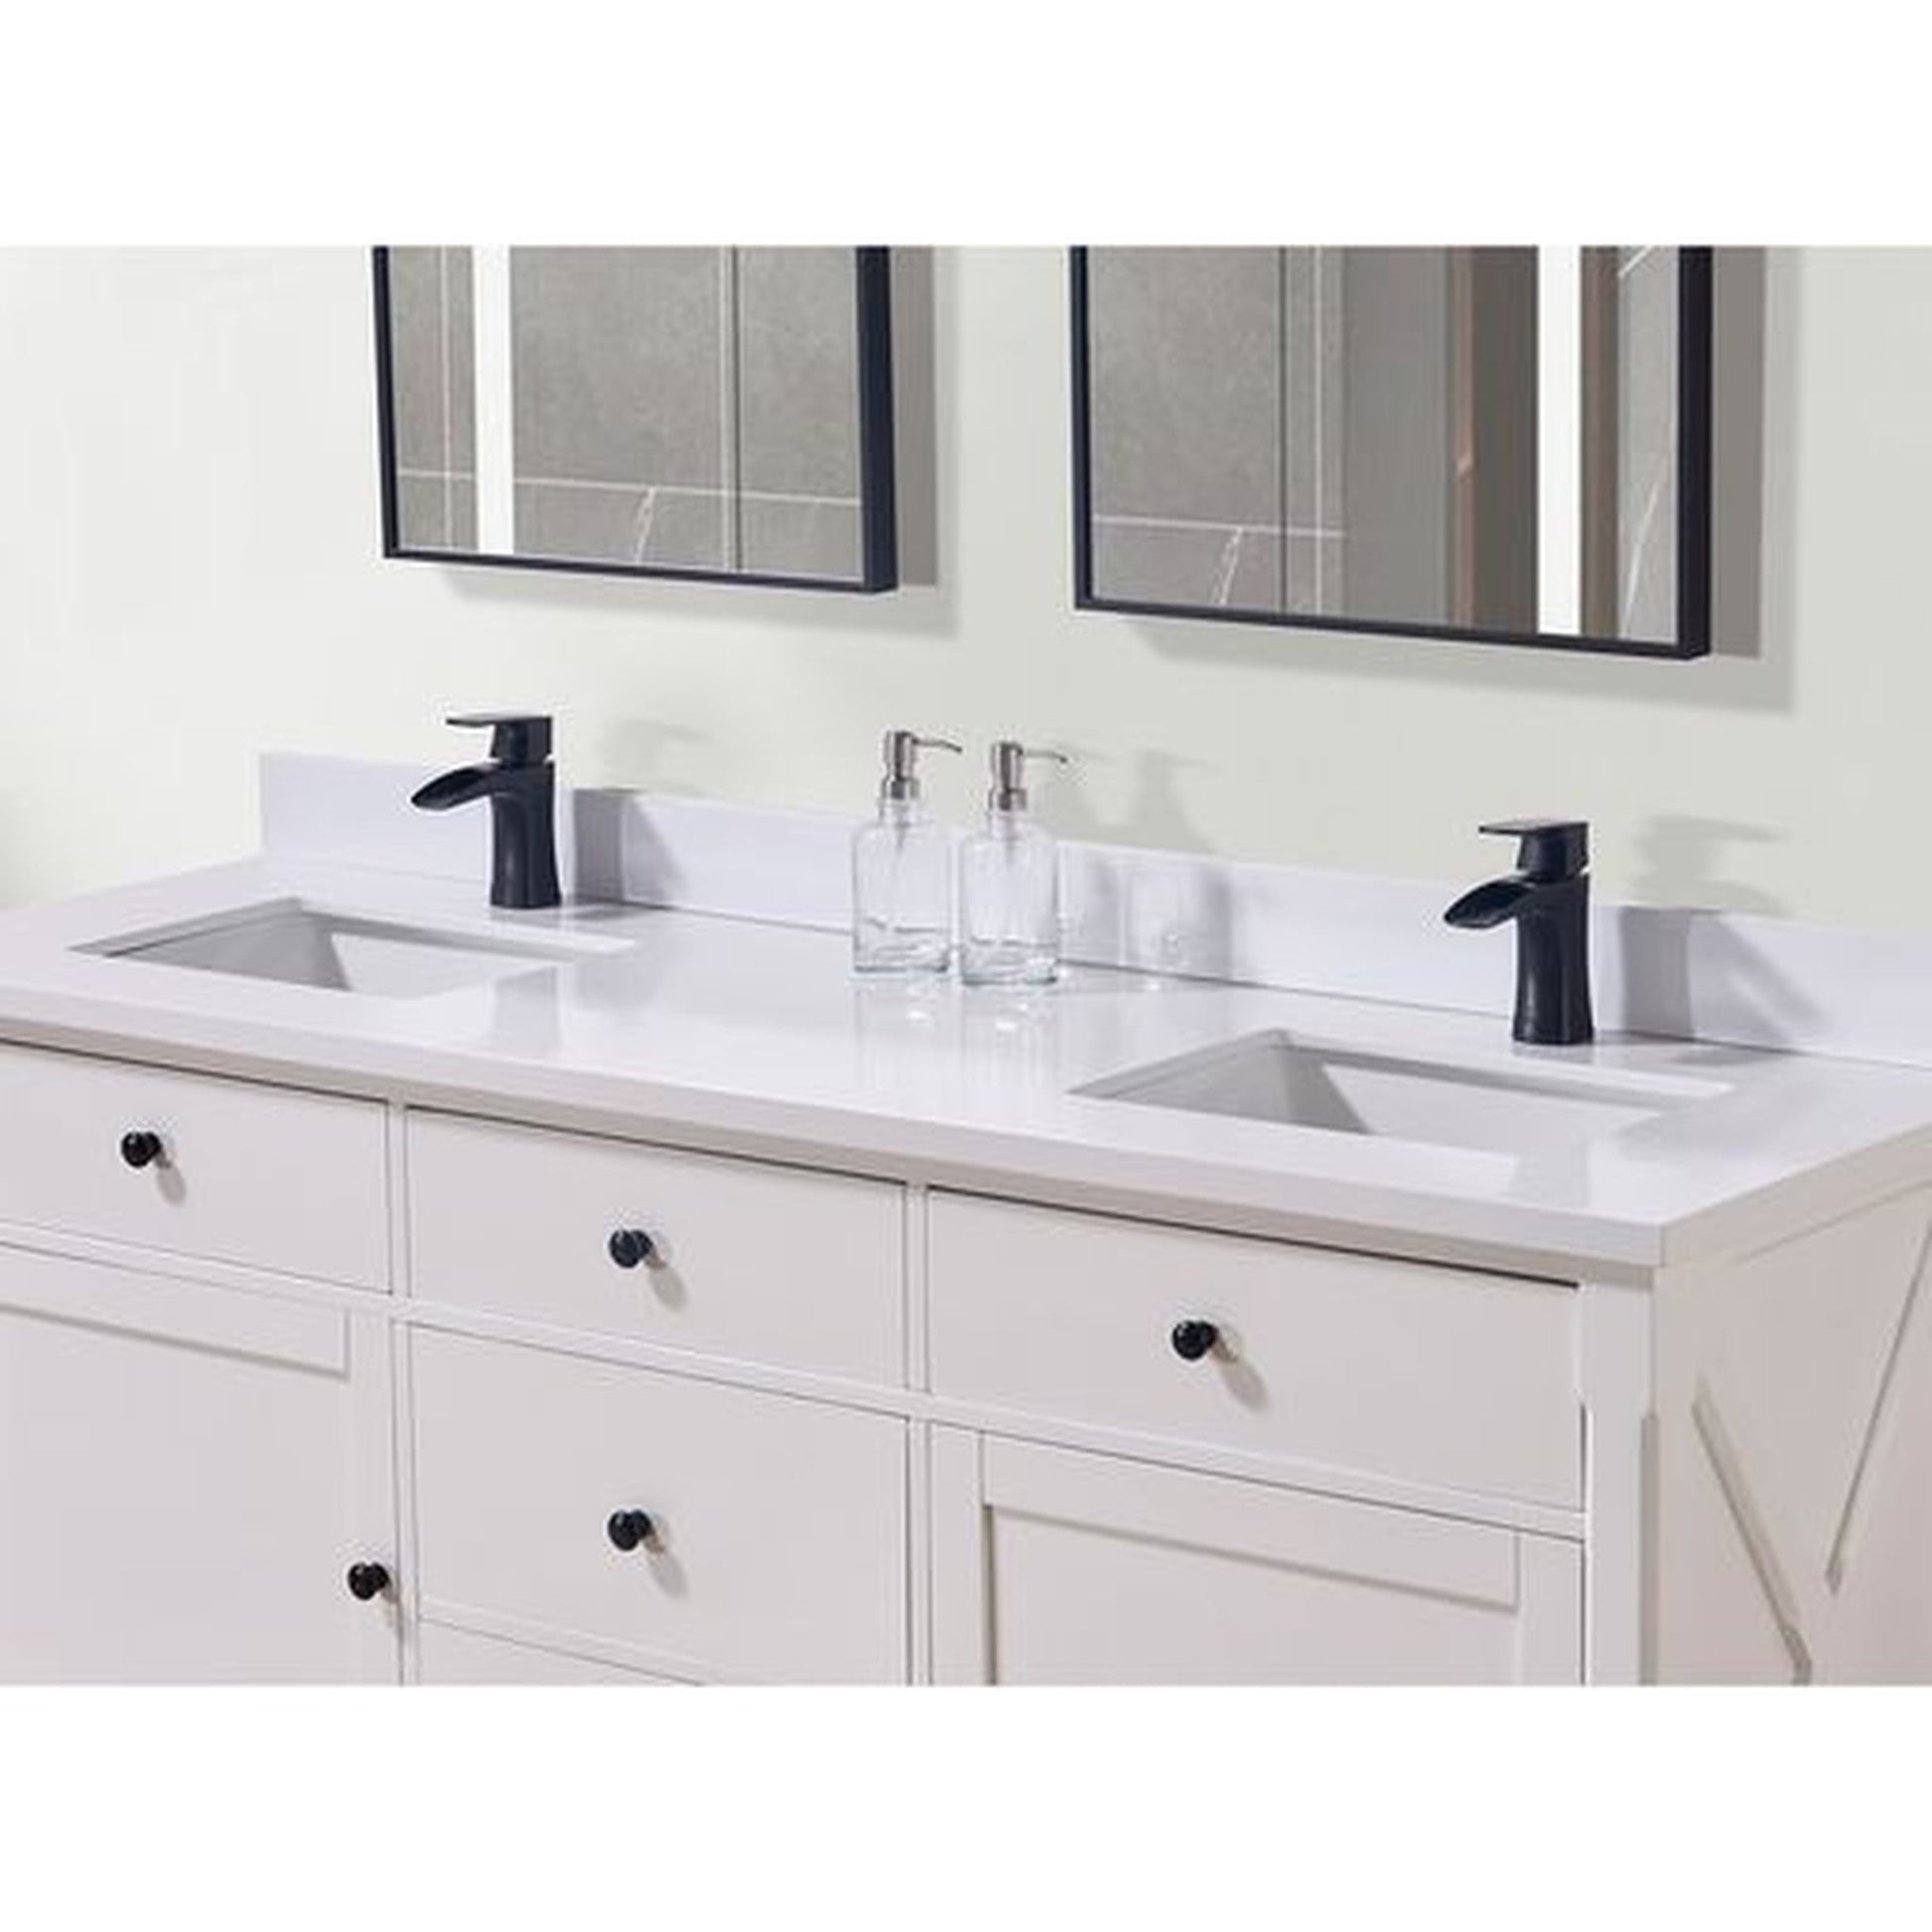 Altair Caorle 73" x 22" Snow White Composite Stone Bathroom Vanity Top With White SInk